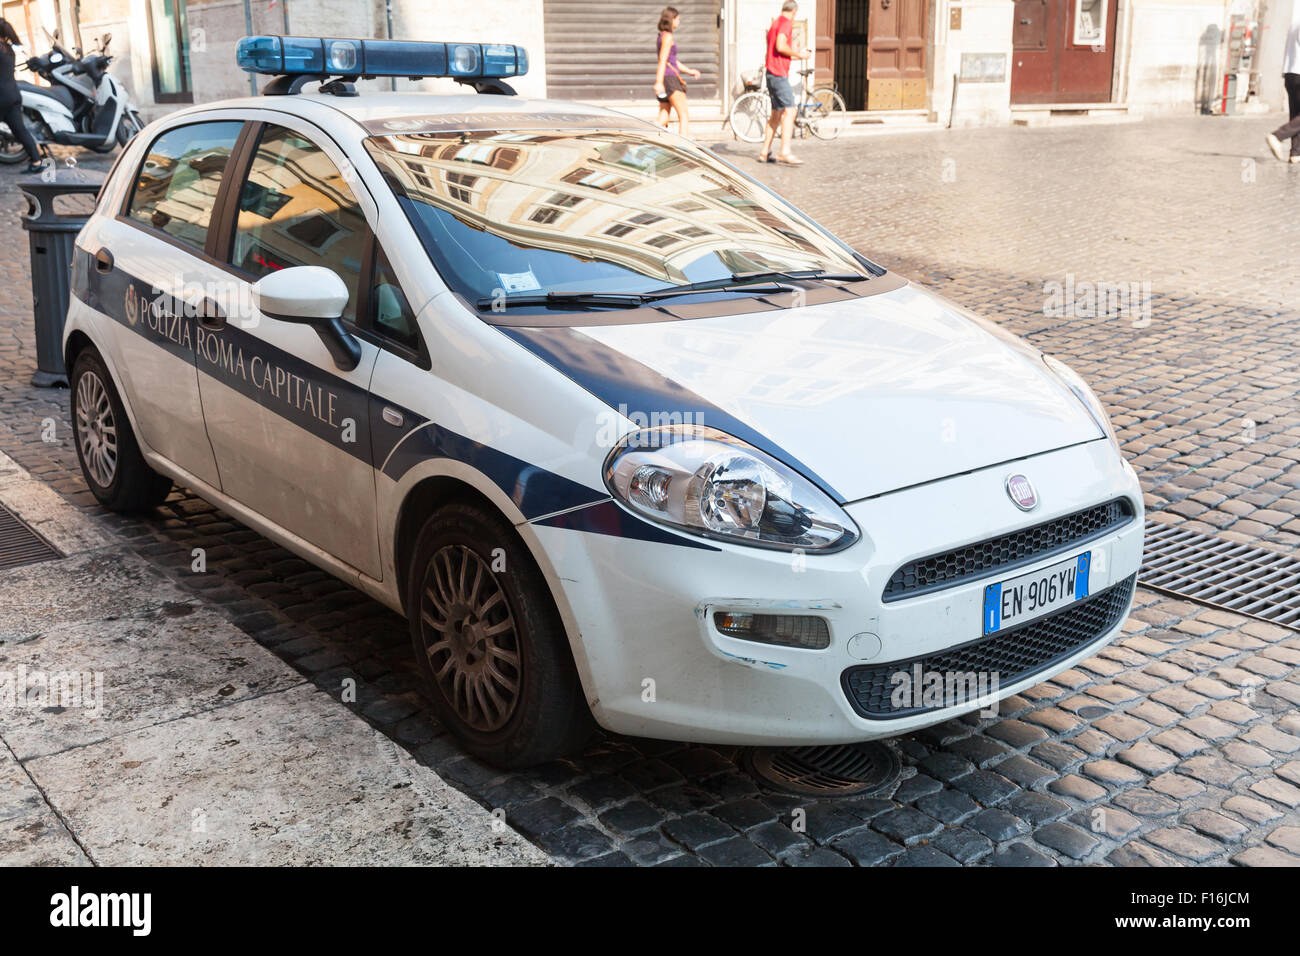 Rome, Italy - August 8, 2015: White Fiat Punto police car stands parked on the city roadside Stock Photo